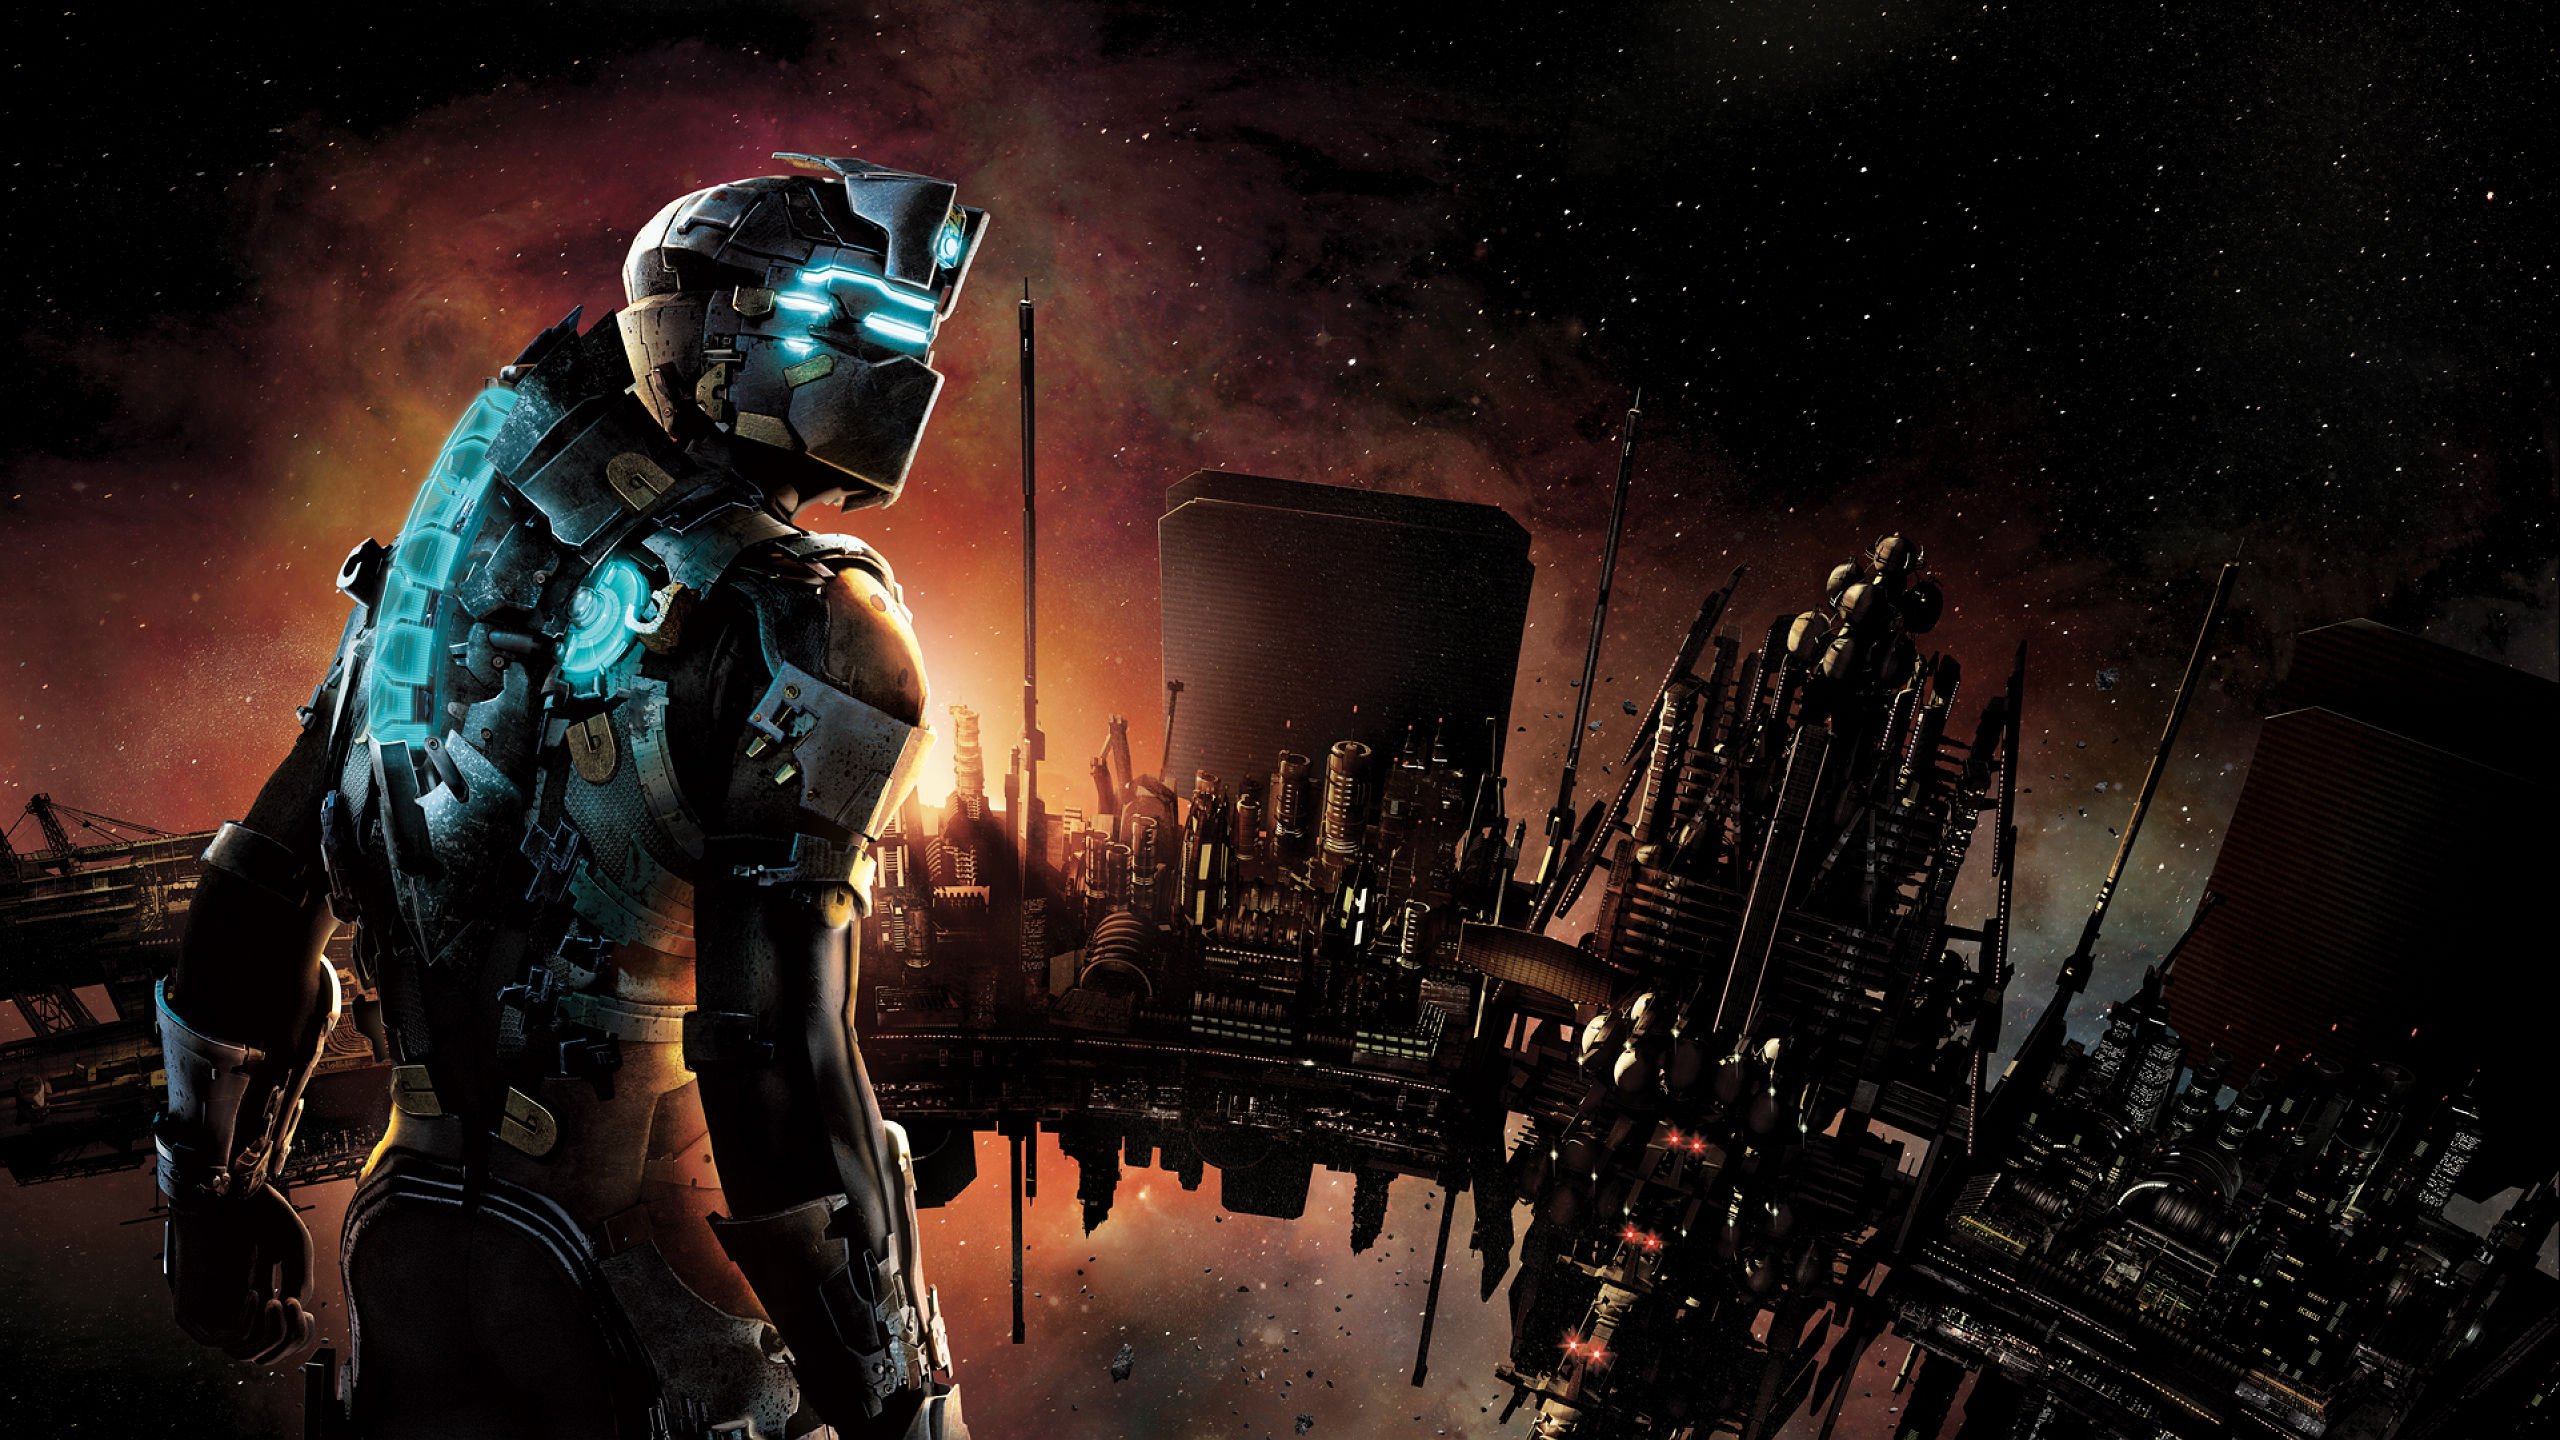 dead, Space, Sci fi, Shooter, Action, Futuristic, 1deads, Warrior